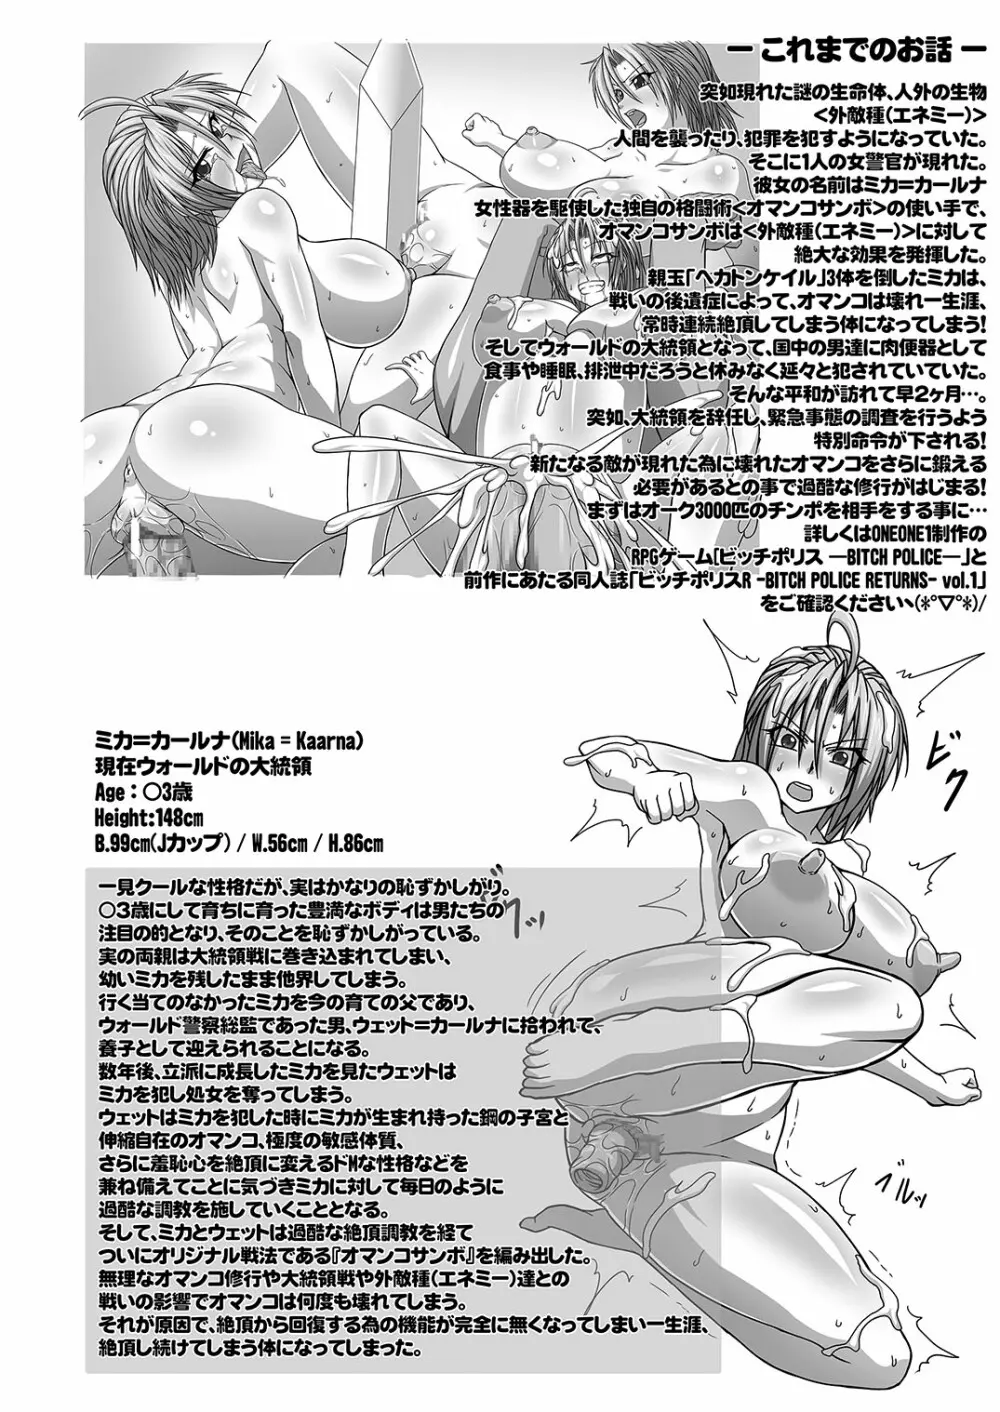 [ONEONE1 (ぺぽ)] ビッチポリスR -BITCH POLICE RETURNS- Vol.2 [DL版] Page.3